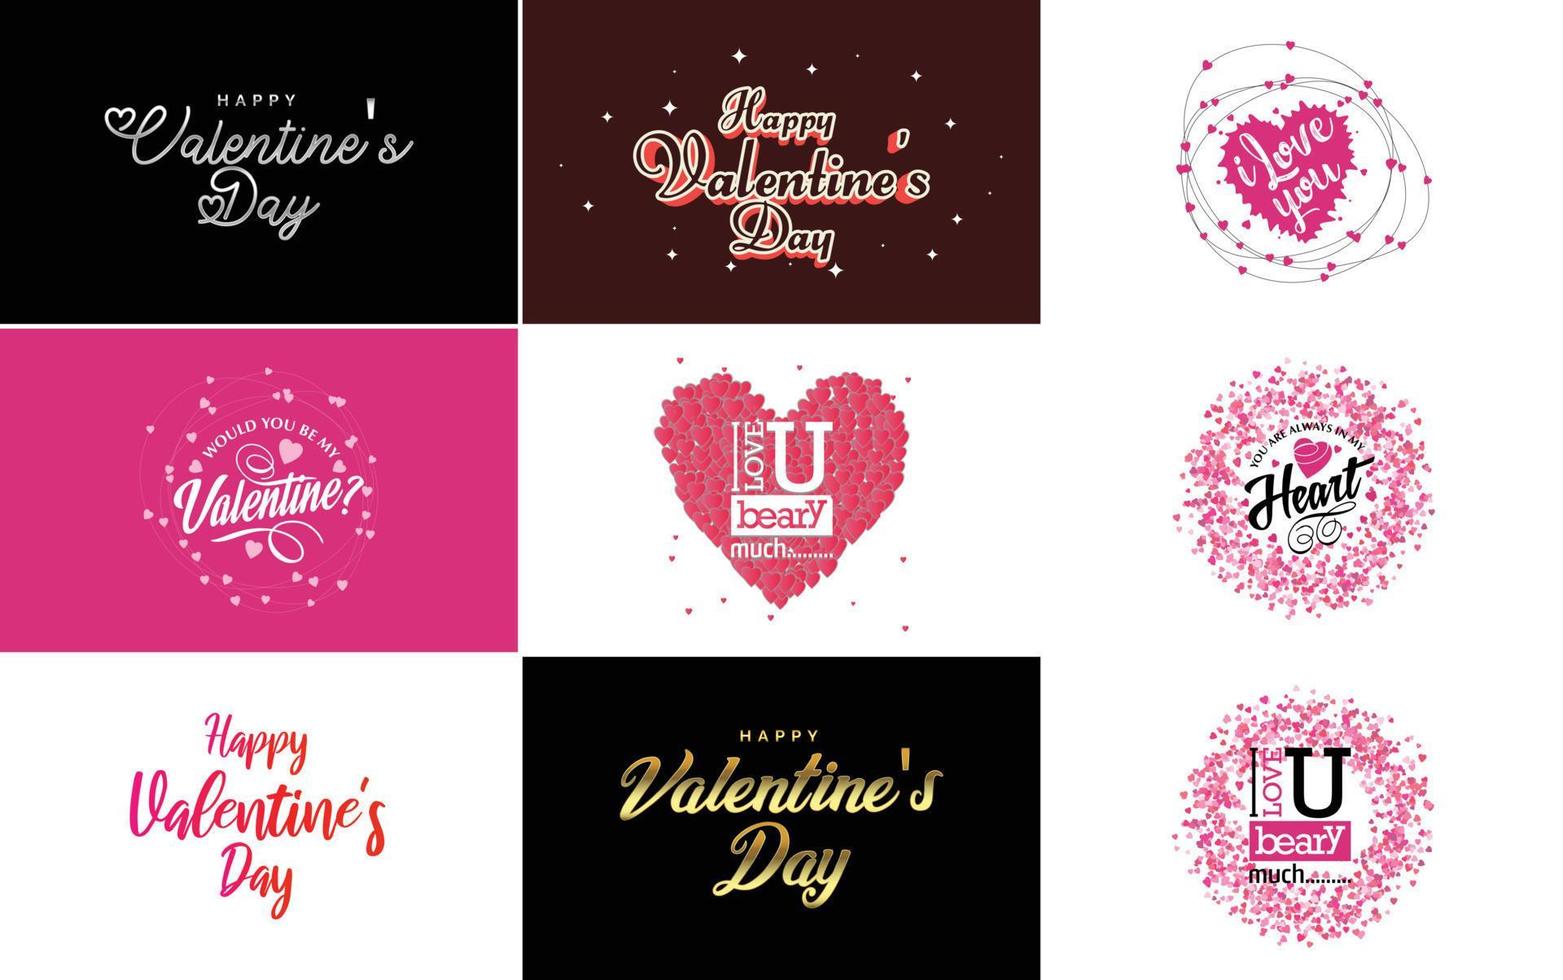 Valentine's hand-drawn lettering with a heart design suitable for use as a Valentine's Day greeting or in romantic designs vector